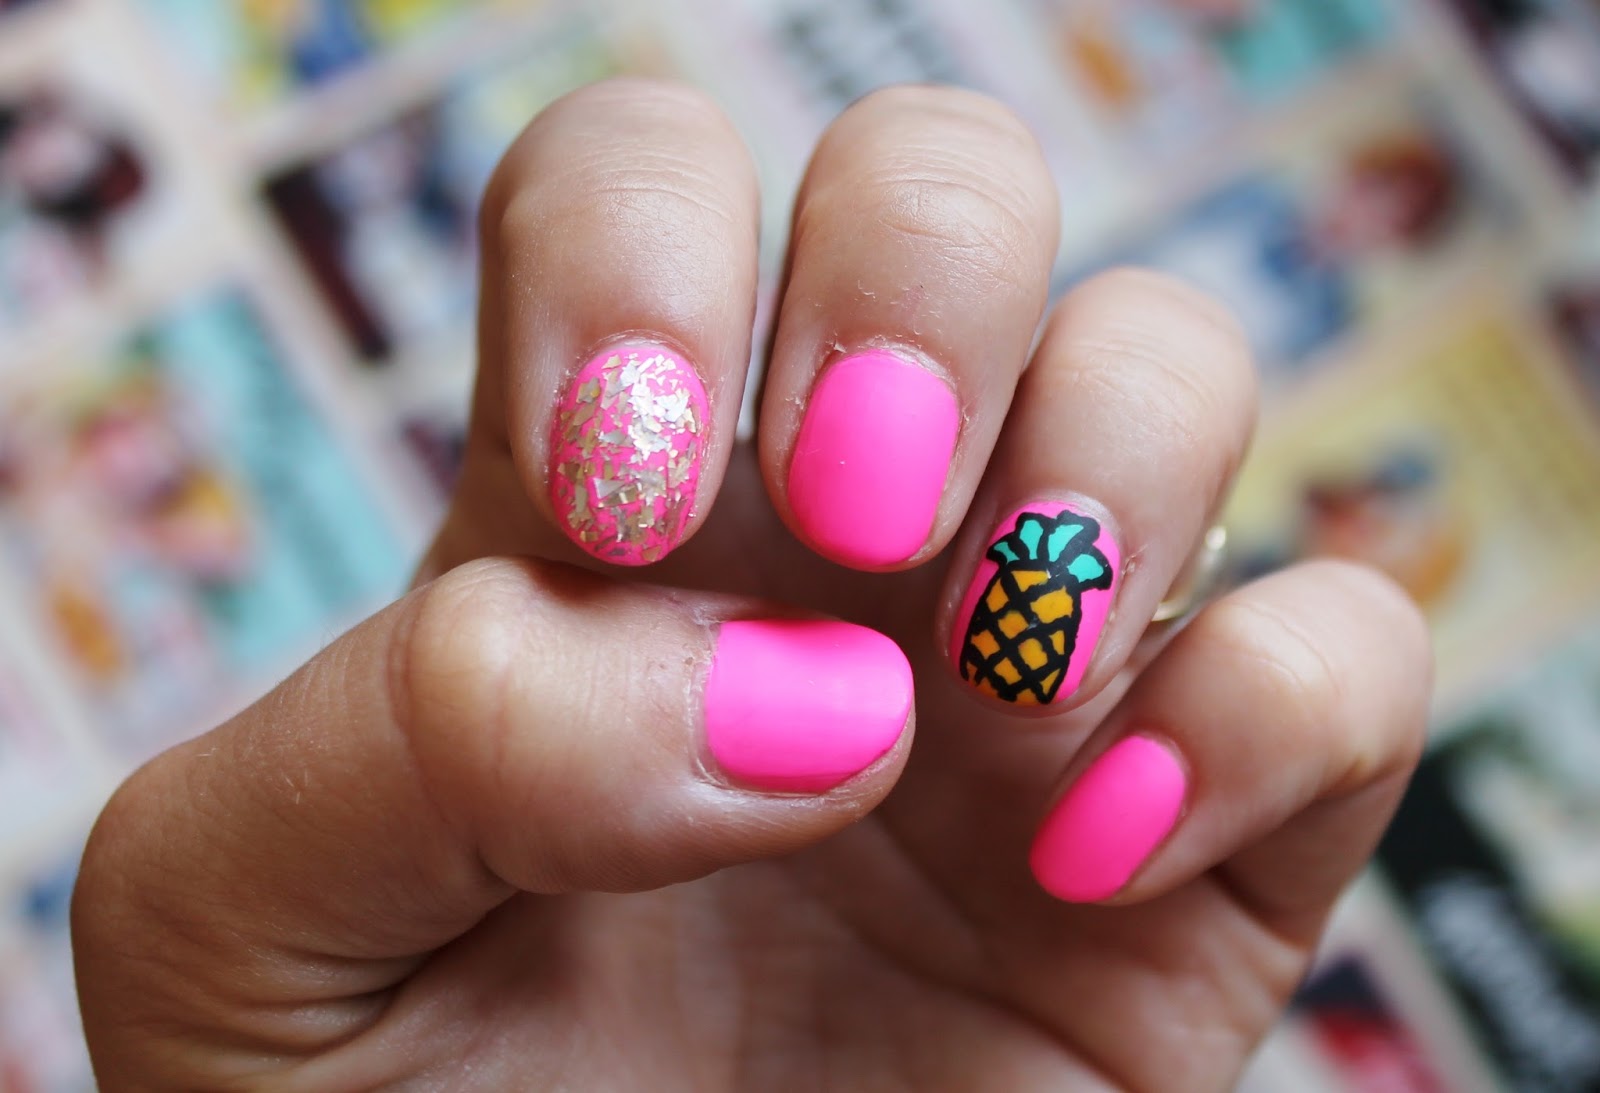 1. Pineapple Nail Art Stickers - 10 Sheets - wide 10